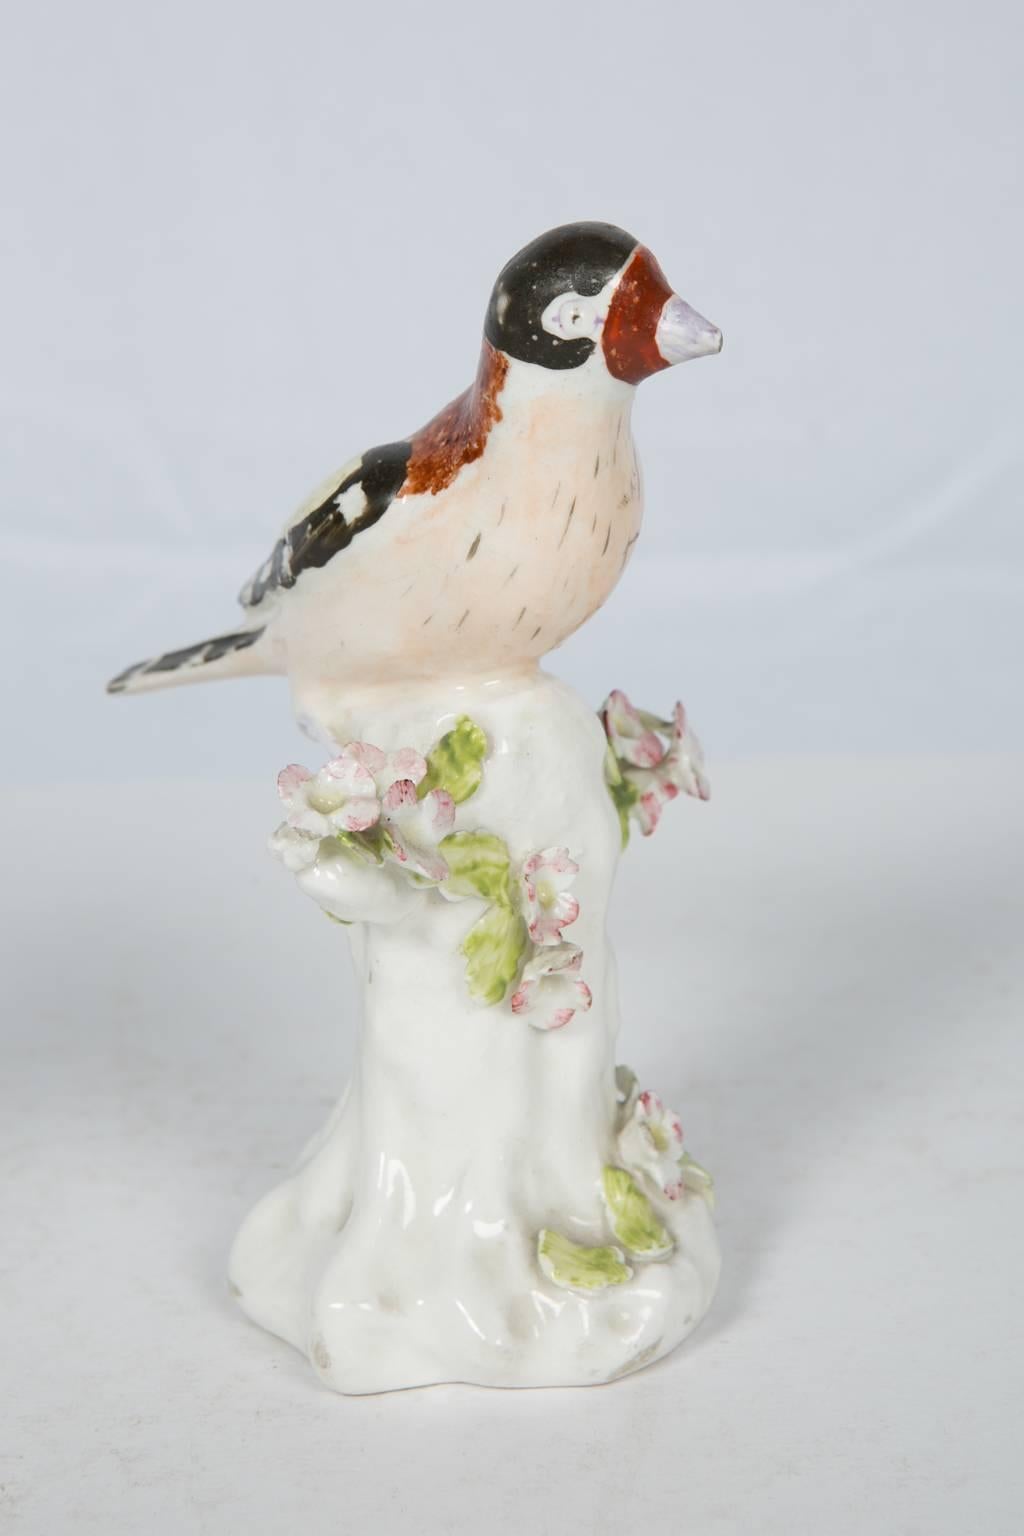 A pair of late 18th century Derby porcelain life-size figures of goldfinches. The goldfinch is an exquisite little bird with a beautiful high-pitched song. Each bird is shown perched on a tree stump which is lightly decorated with leaves and flower